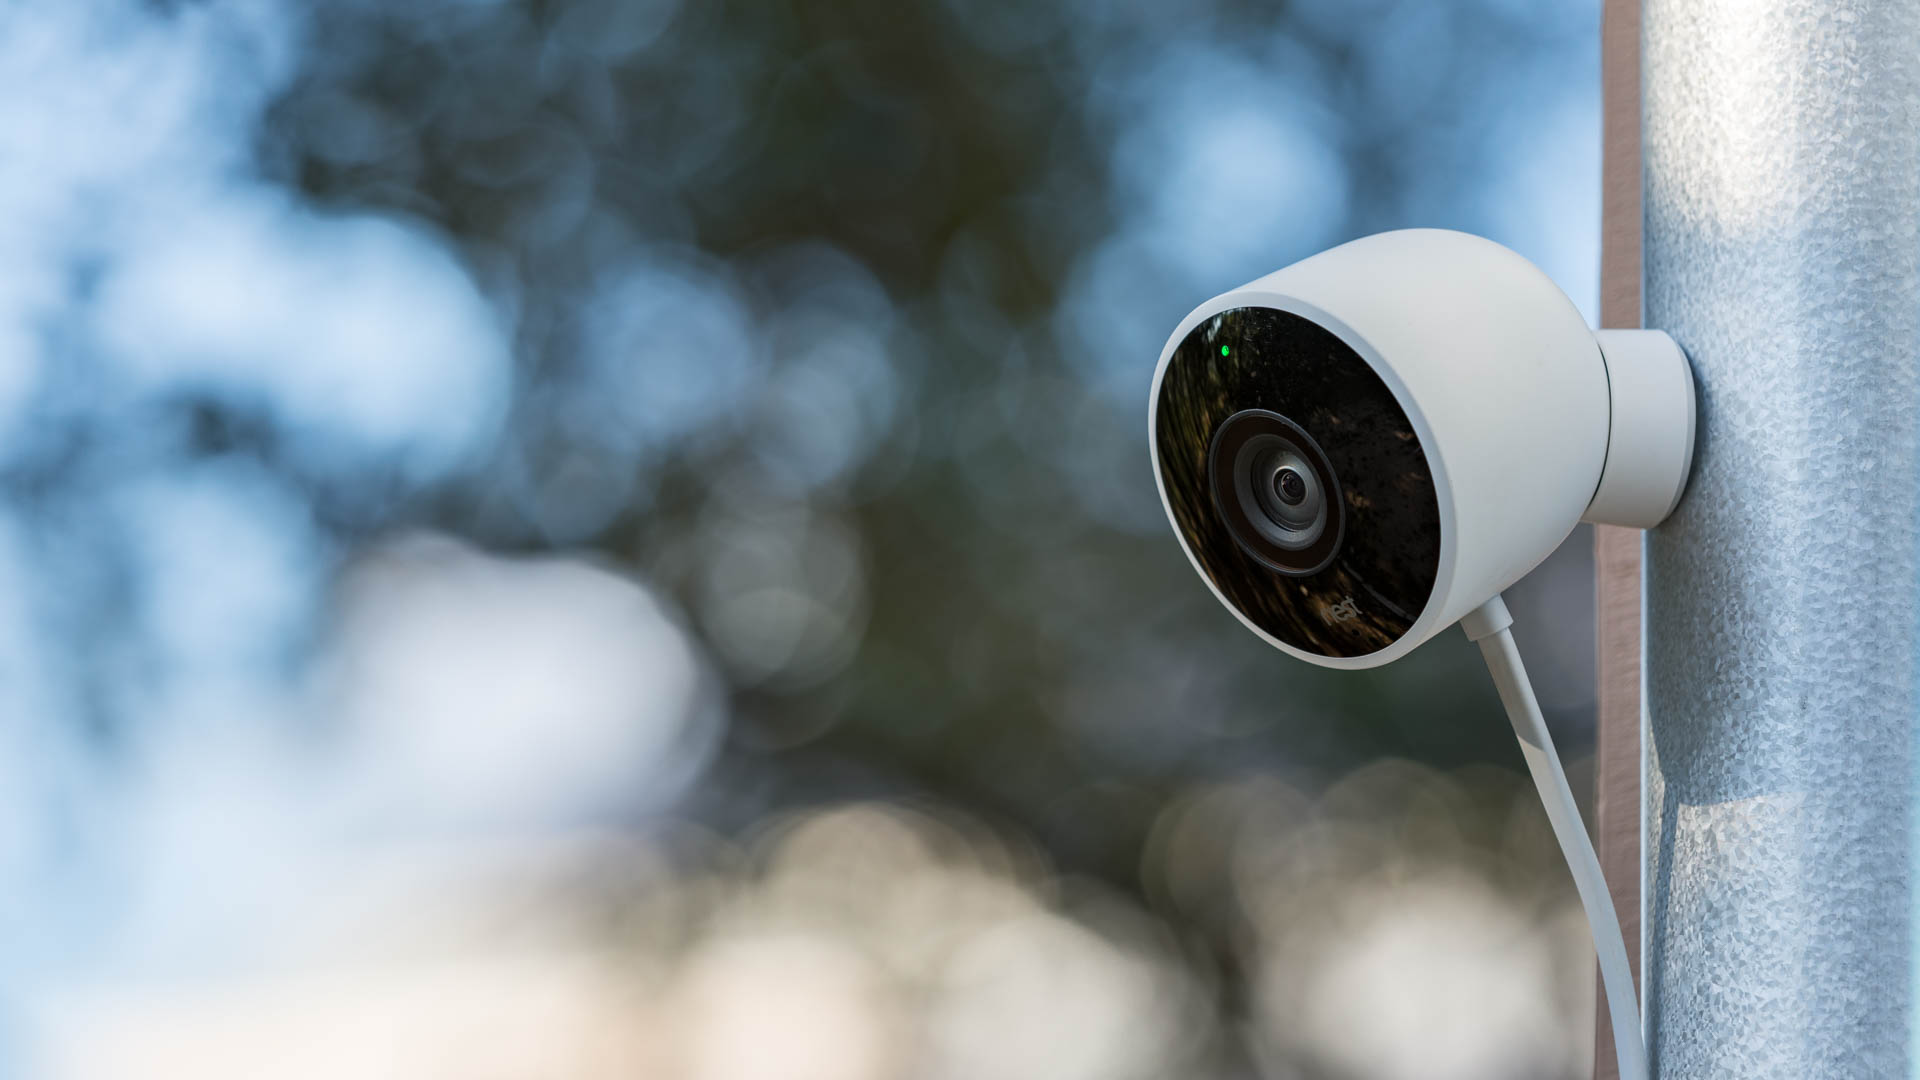 Security camera subscription plan costs and feature sets vary significantly from manufacturer to manufacturer. It pays to do your research, but we just made it much easier for you with this guide. Image: Digitized House.